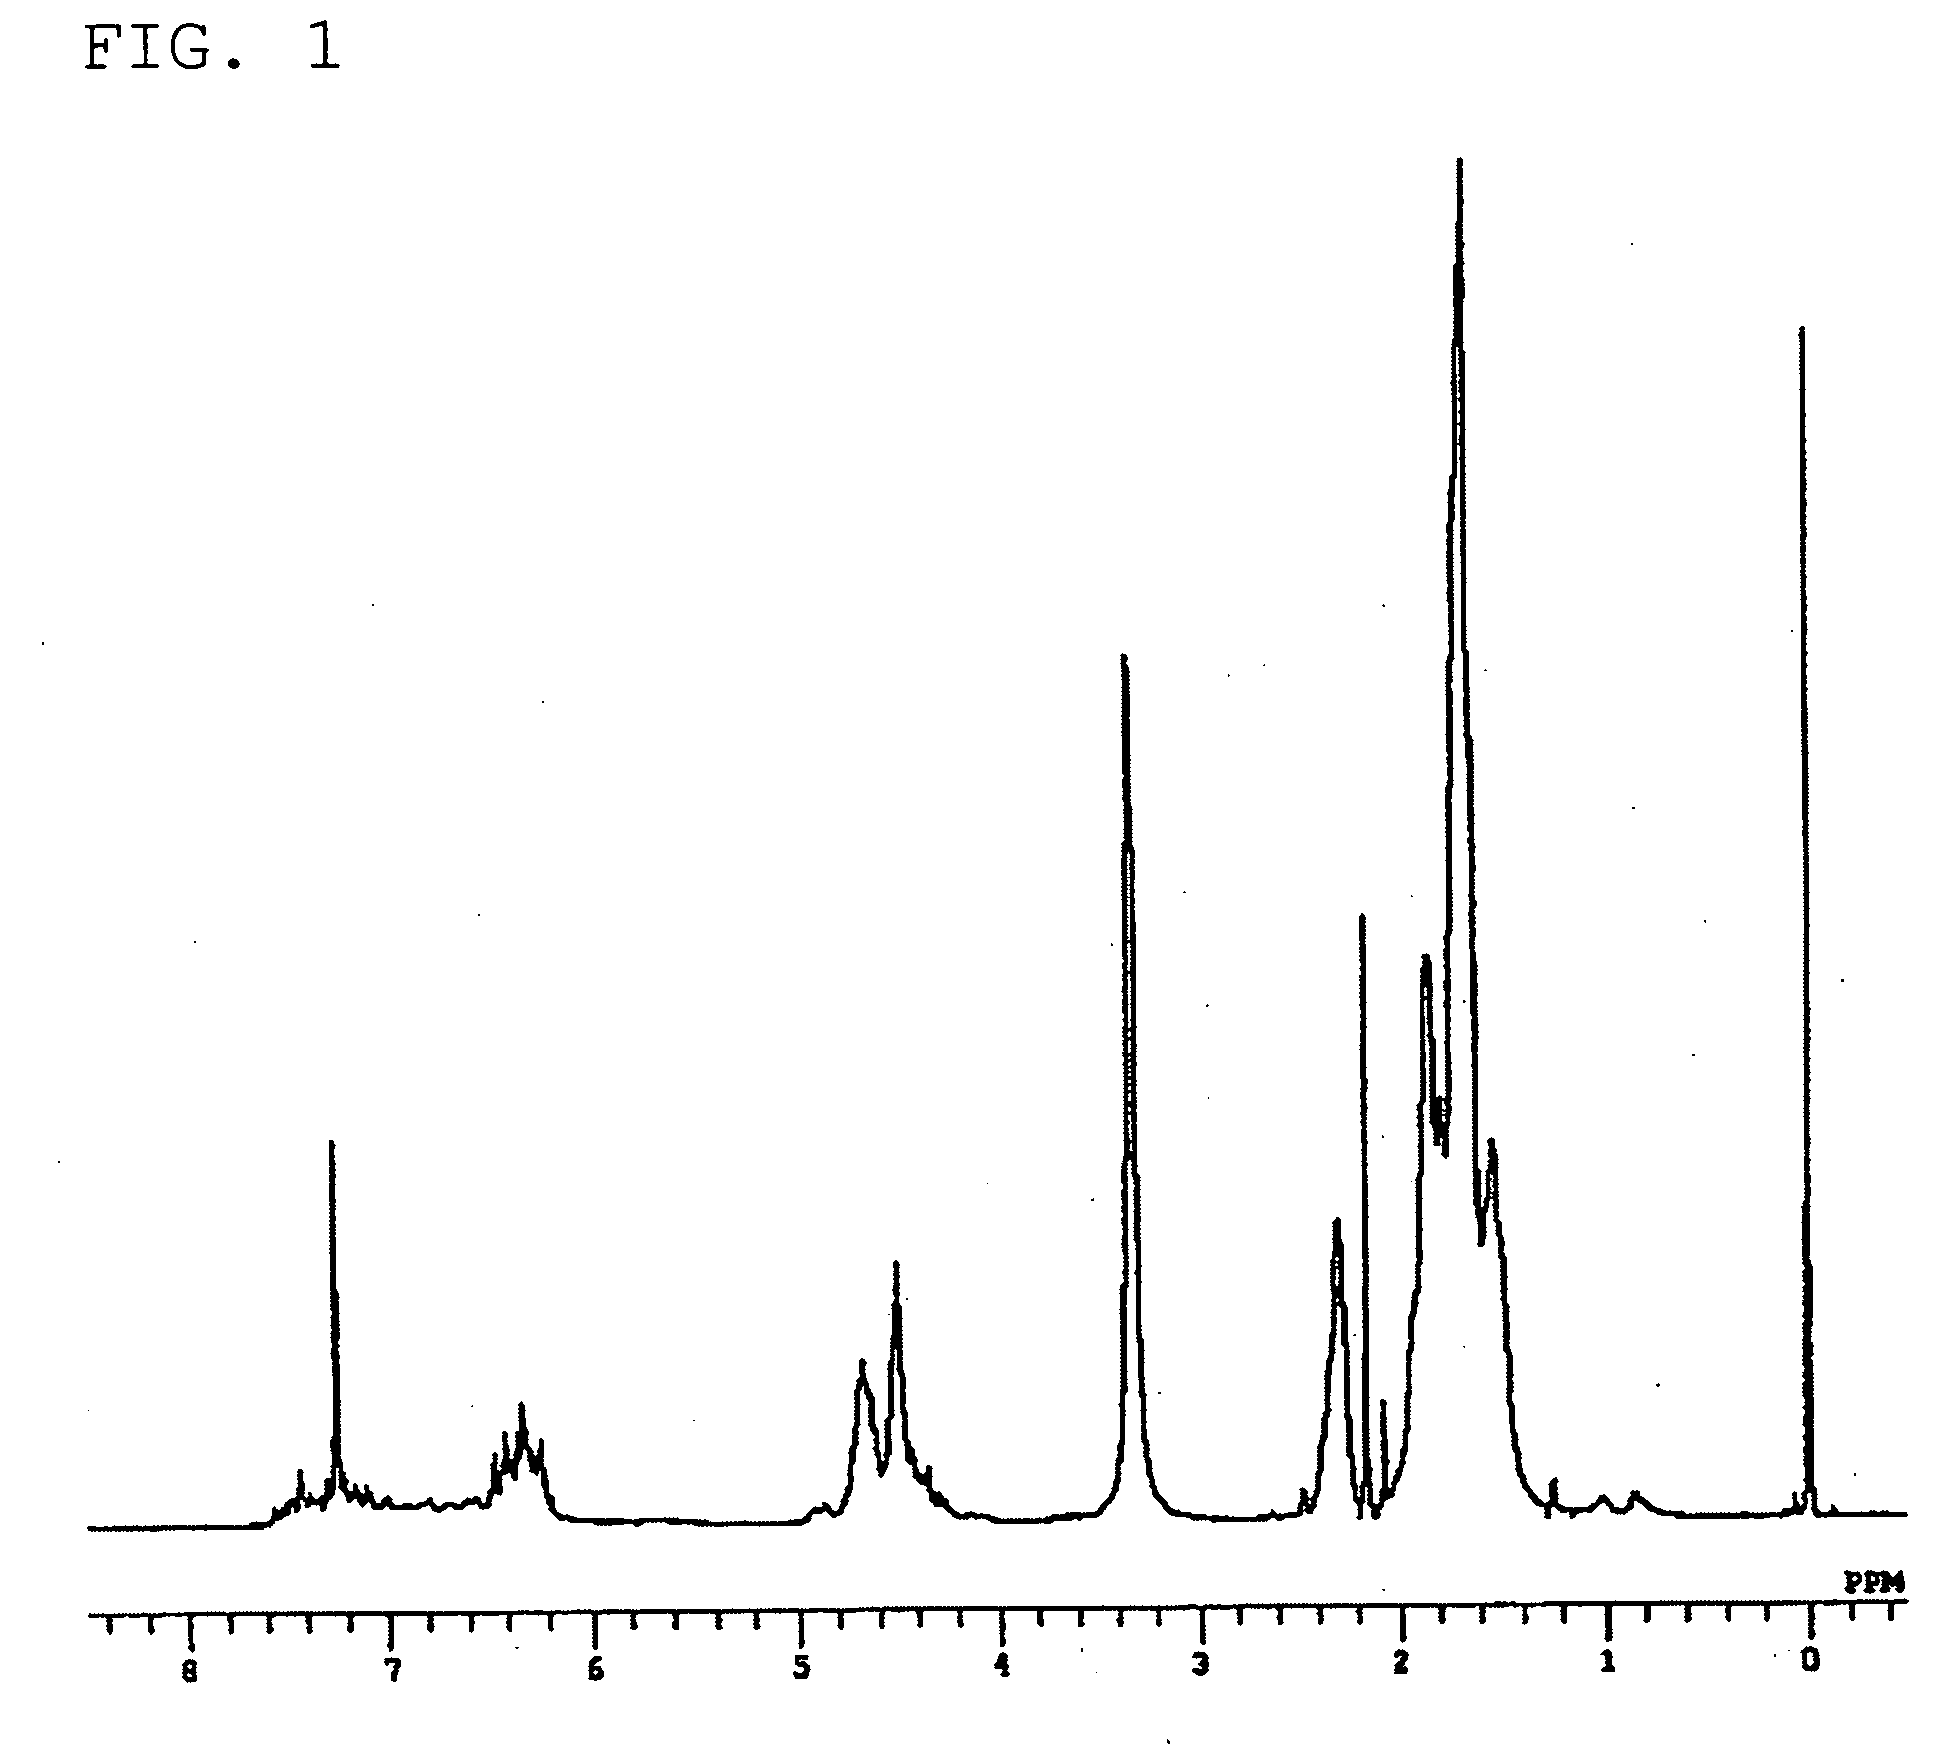 Calixresorcinarene compounds, photoresist base materials, and compositions thereof